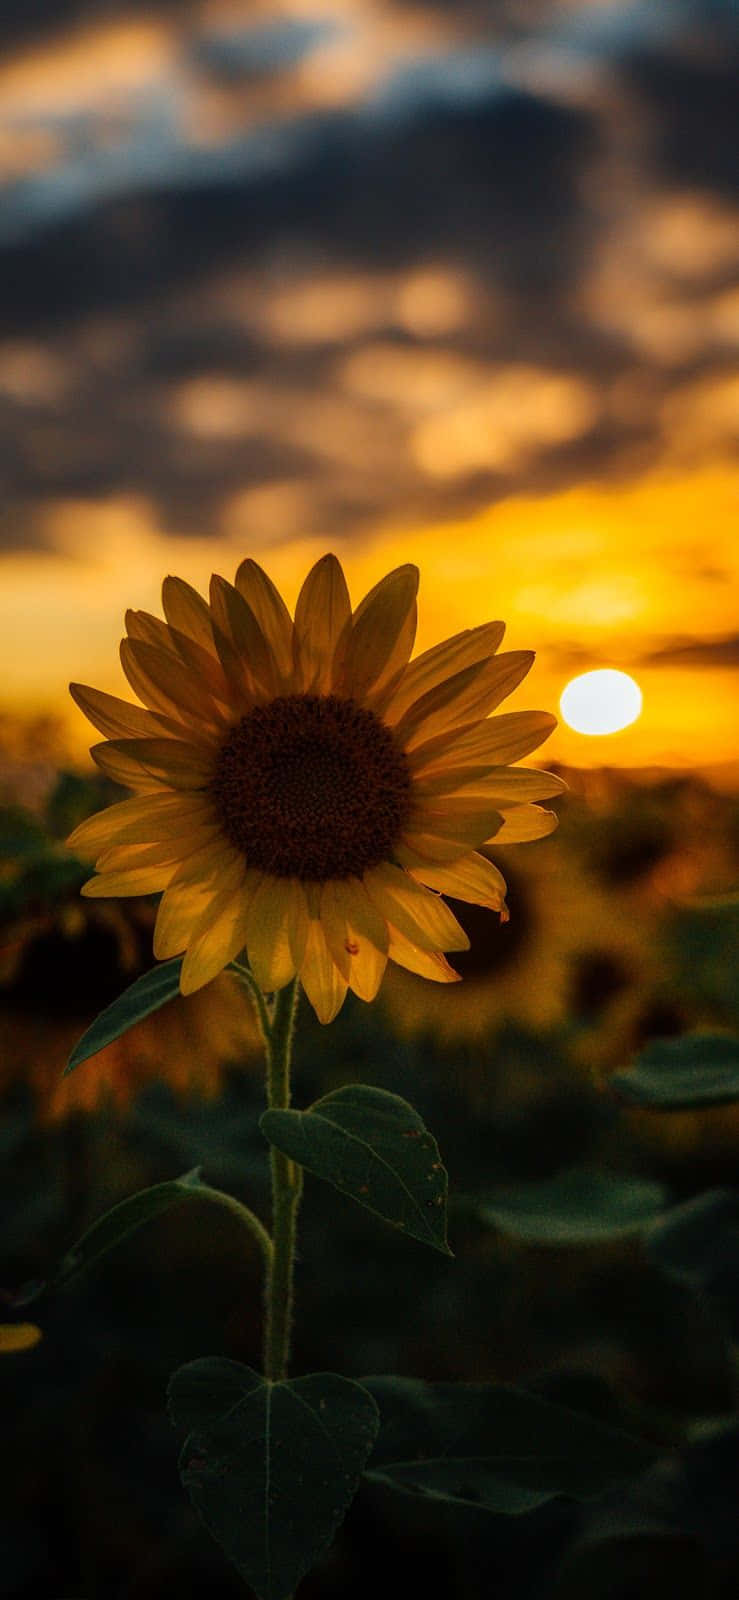 A sunflower in a field during a sunset - Warm